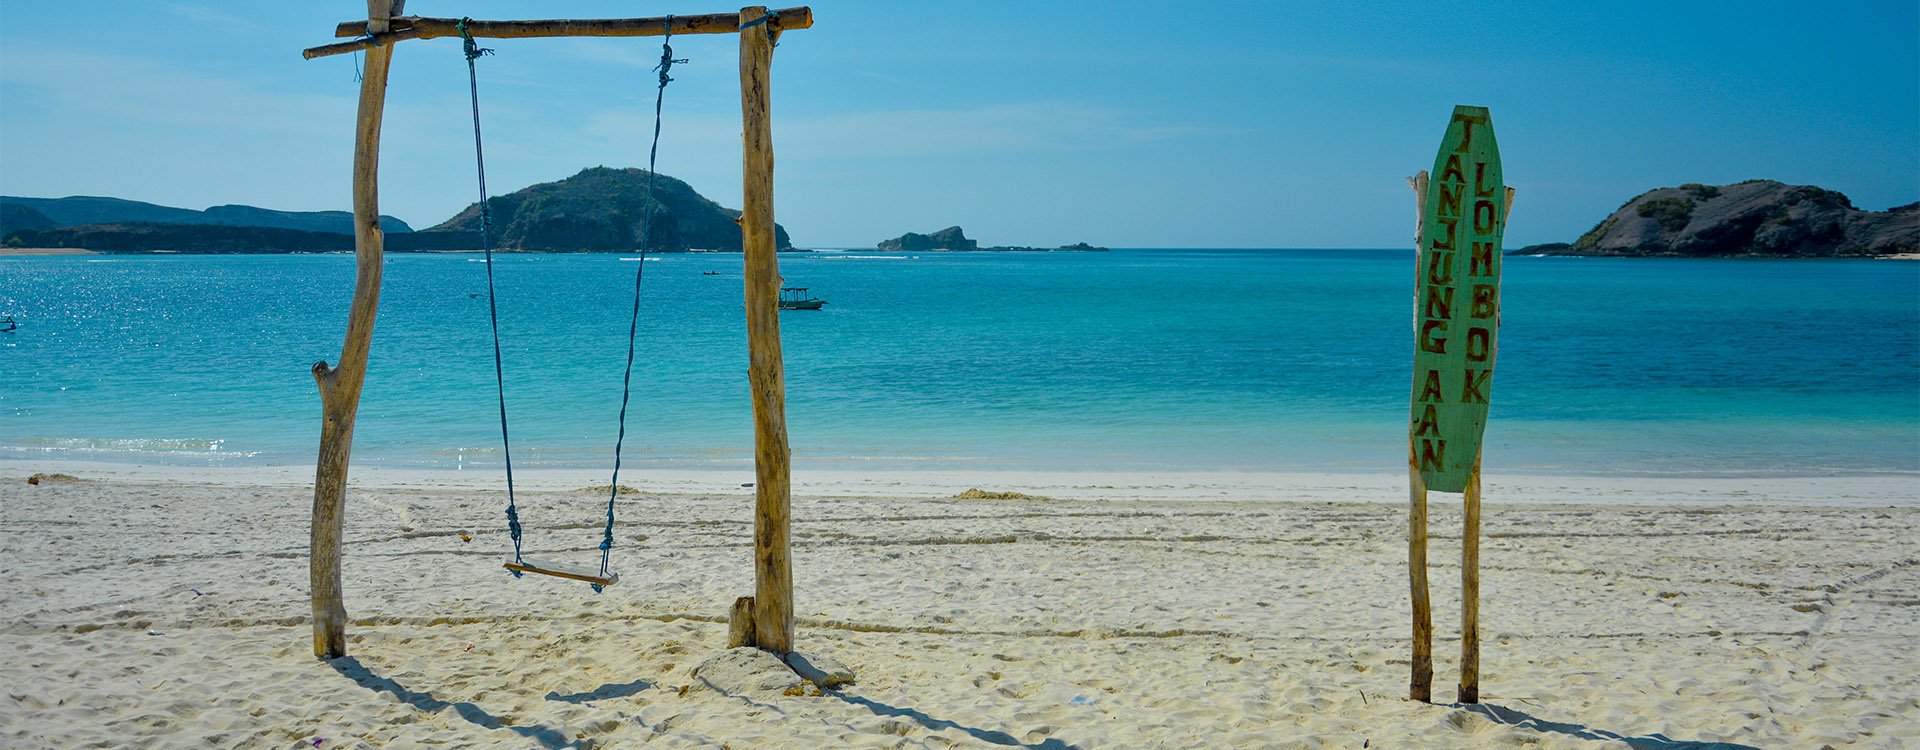 Wooden swing along the beauty of Tanjung Aan Beach, Lombok Island, Indonesia